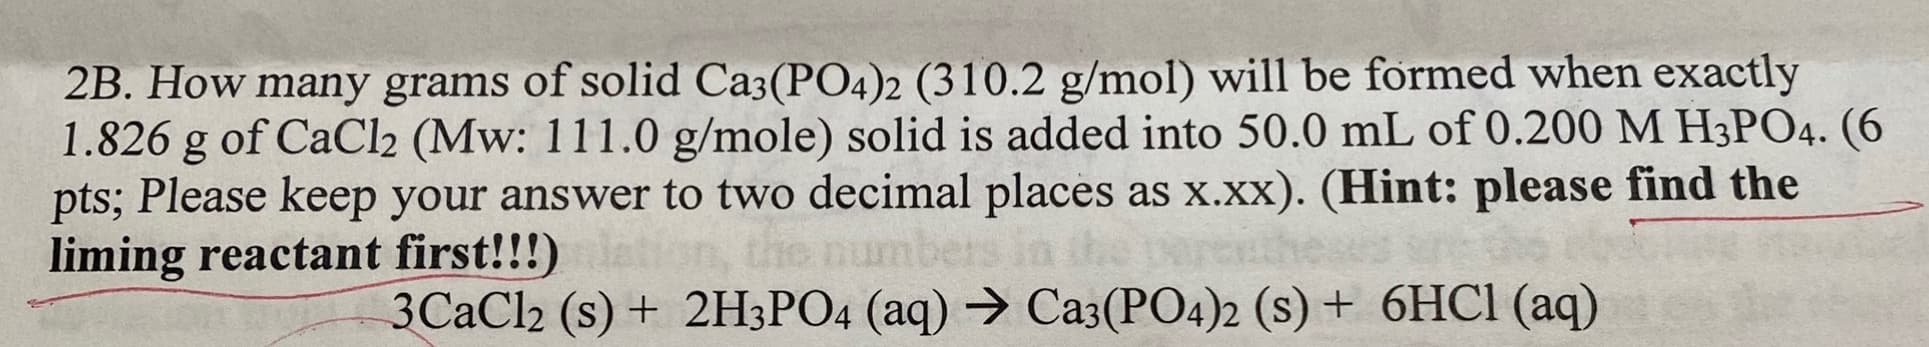 2B. How many grams of solid Ca3(PO4)2 (310.2 g/mol) will be formed when exactly
1.826 g of CaCl2 (Mw: 111.0 g/mole) solid is added into 50.0 mL of 0.200 M H3PO4. (6
pts; Please keep your answer to two decimal places as x.xx). (Hint: please find the
liming reactant first!!!)
3CAC12 (s) + 2H3PO4 (aq) → Ca3(PO4)2 (s) + 6HC1 (aq)
